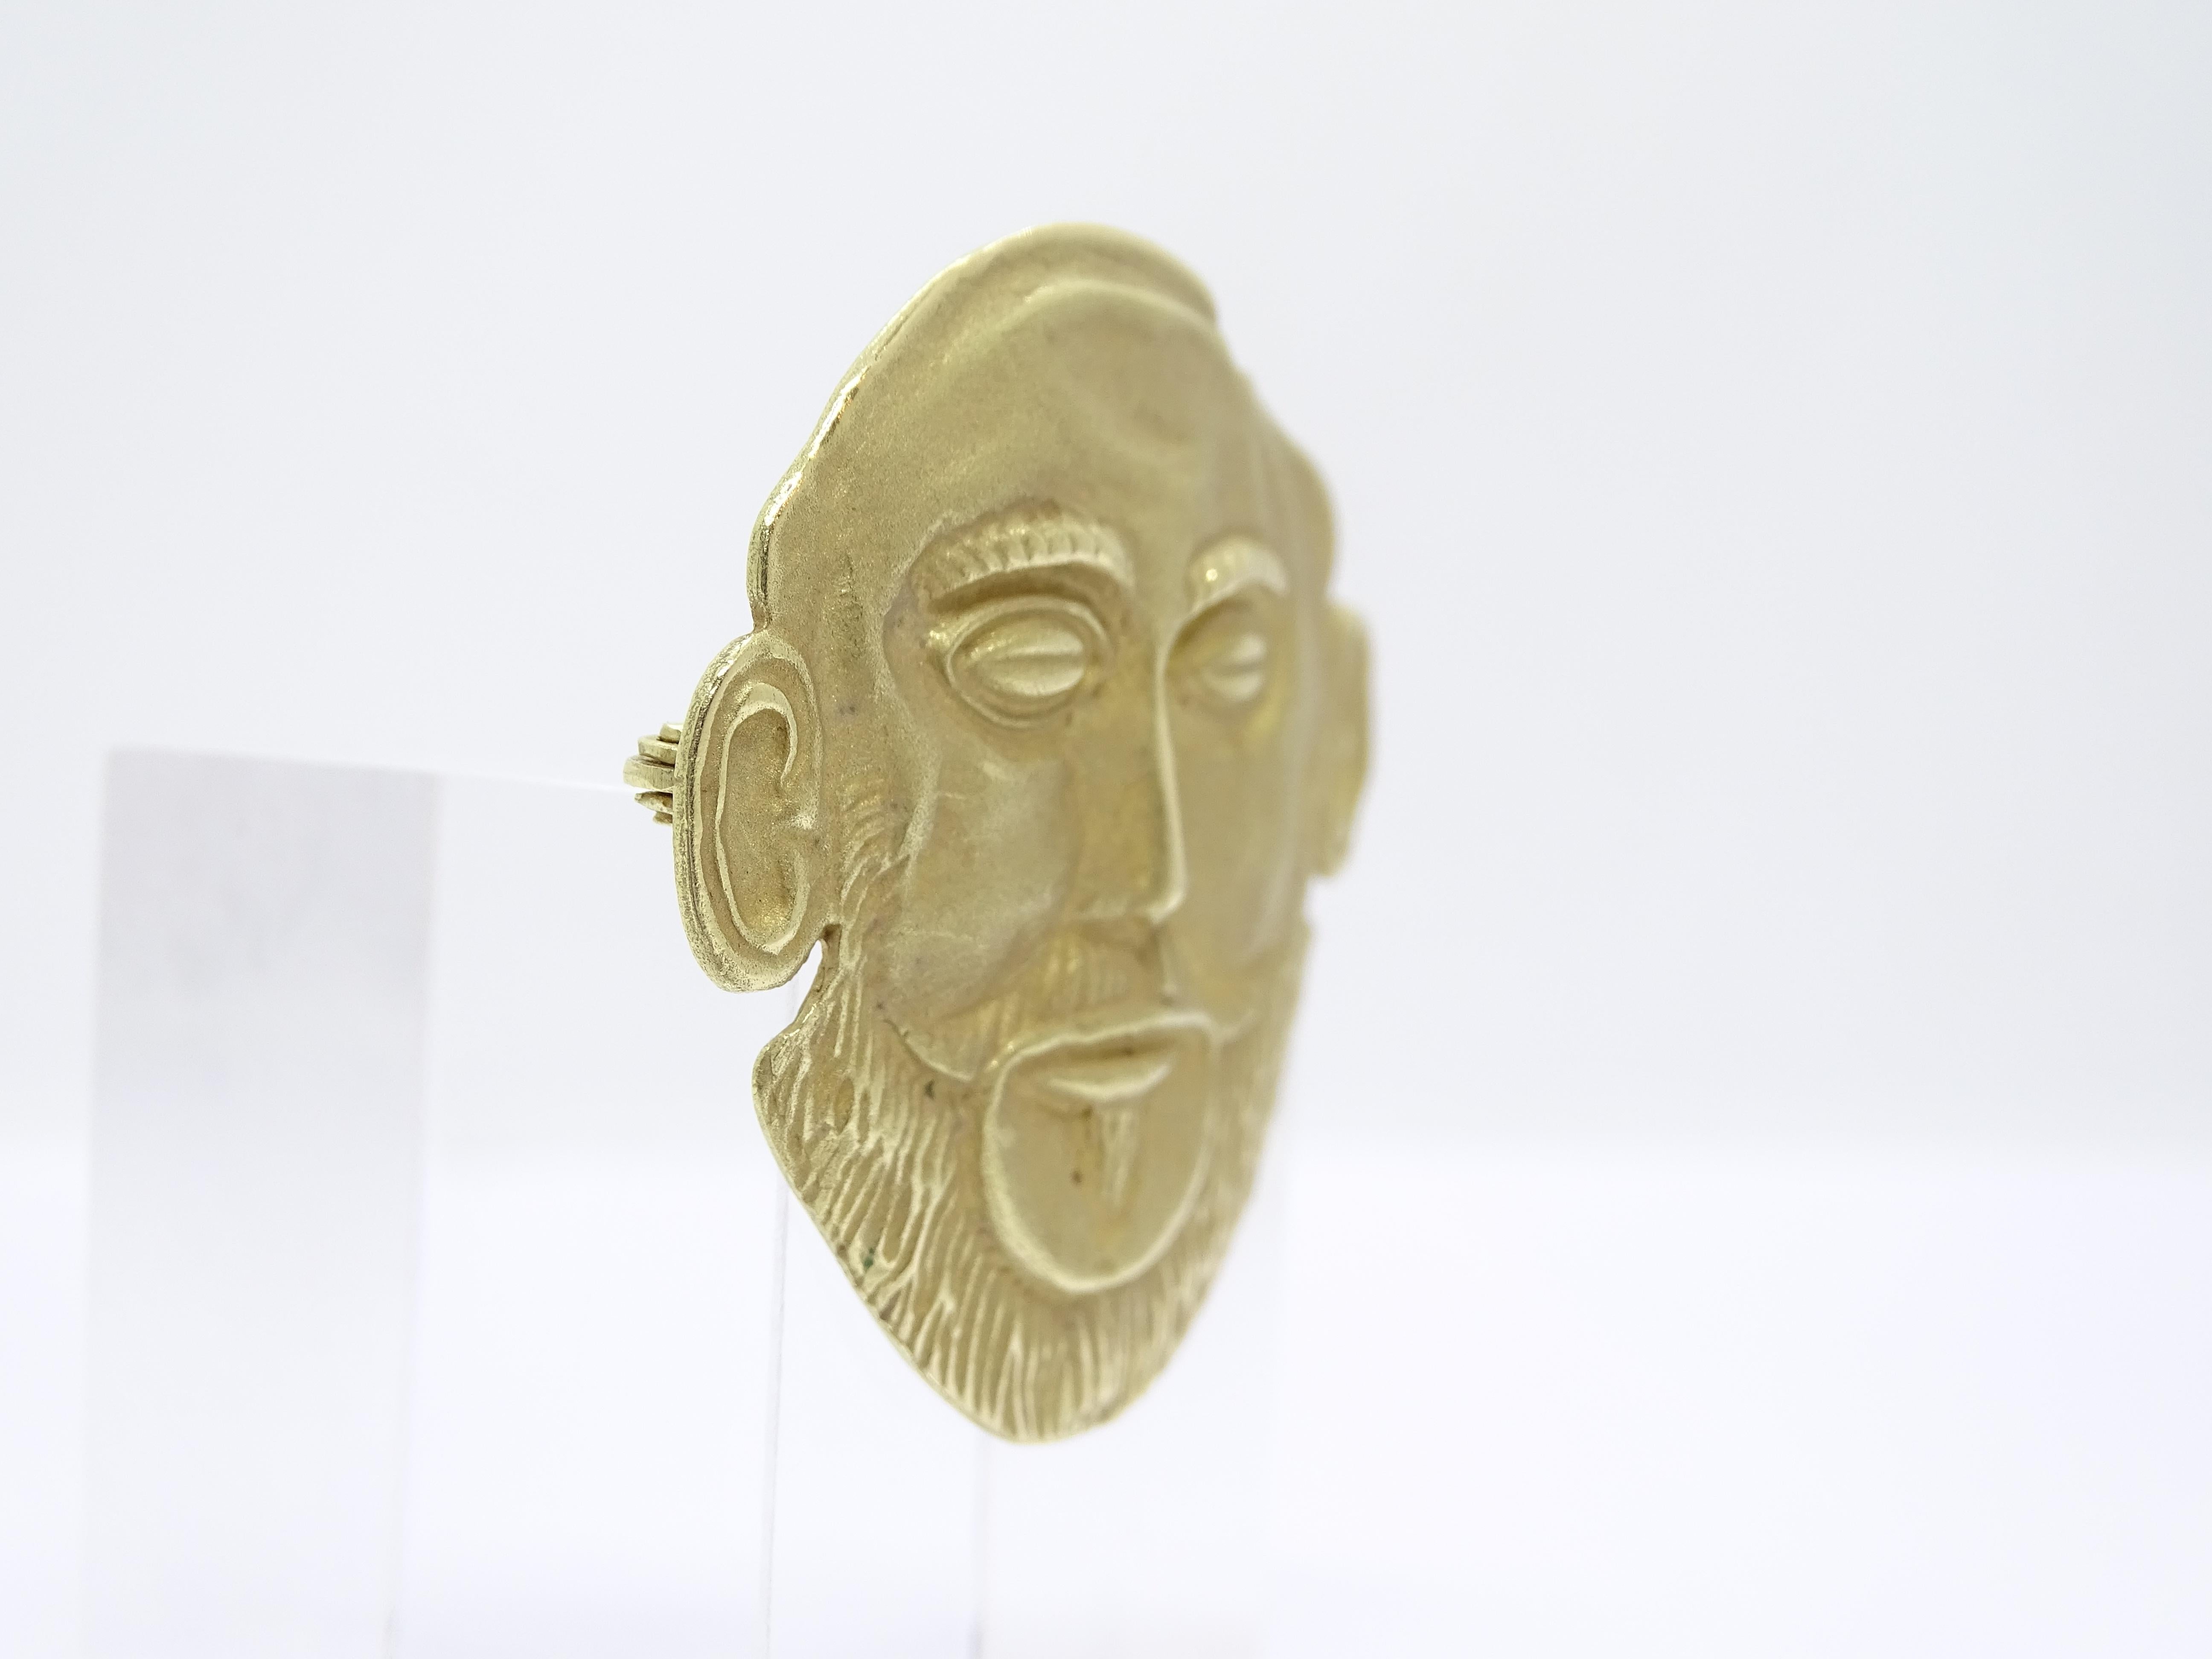 Brooch / Pendant “Mask of Agamemnon”, 18k gold, 90's For Sale 5